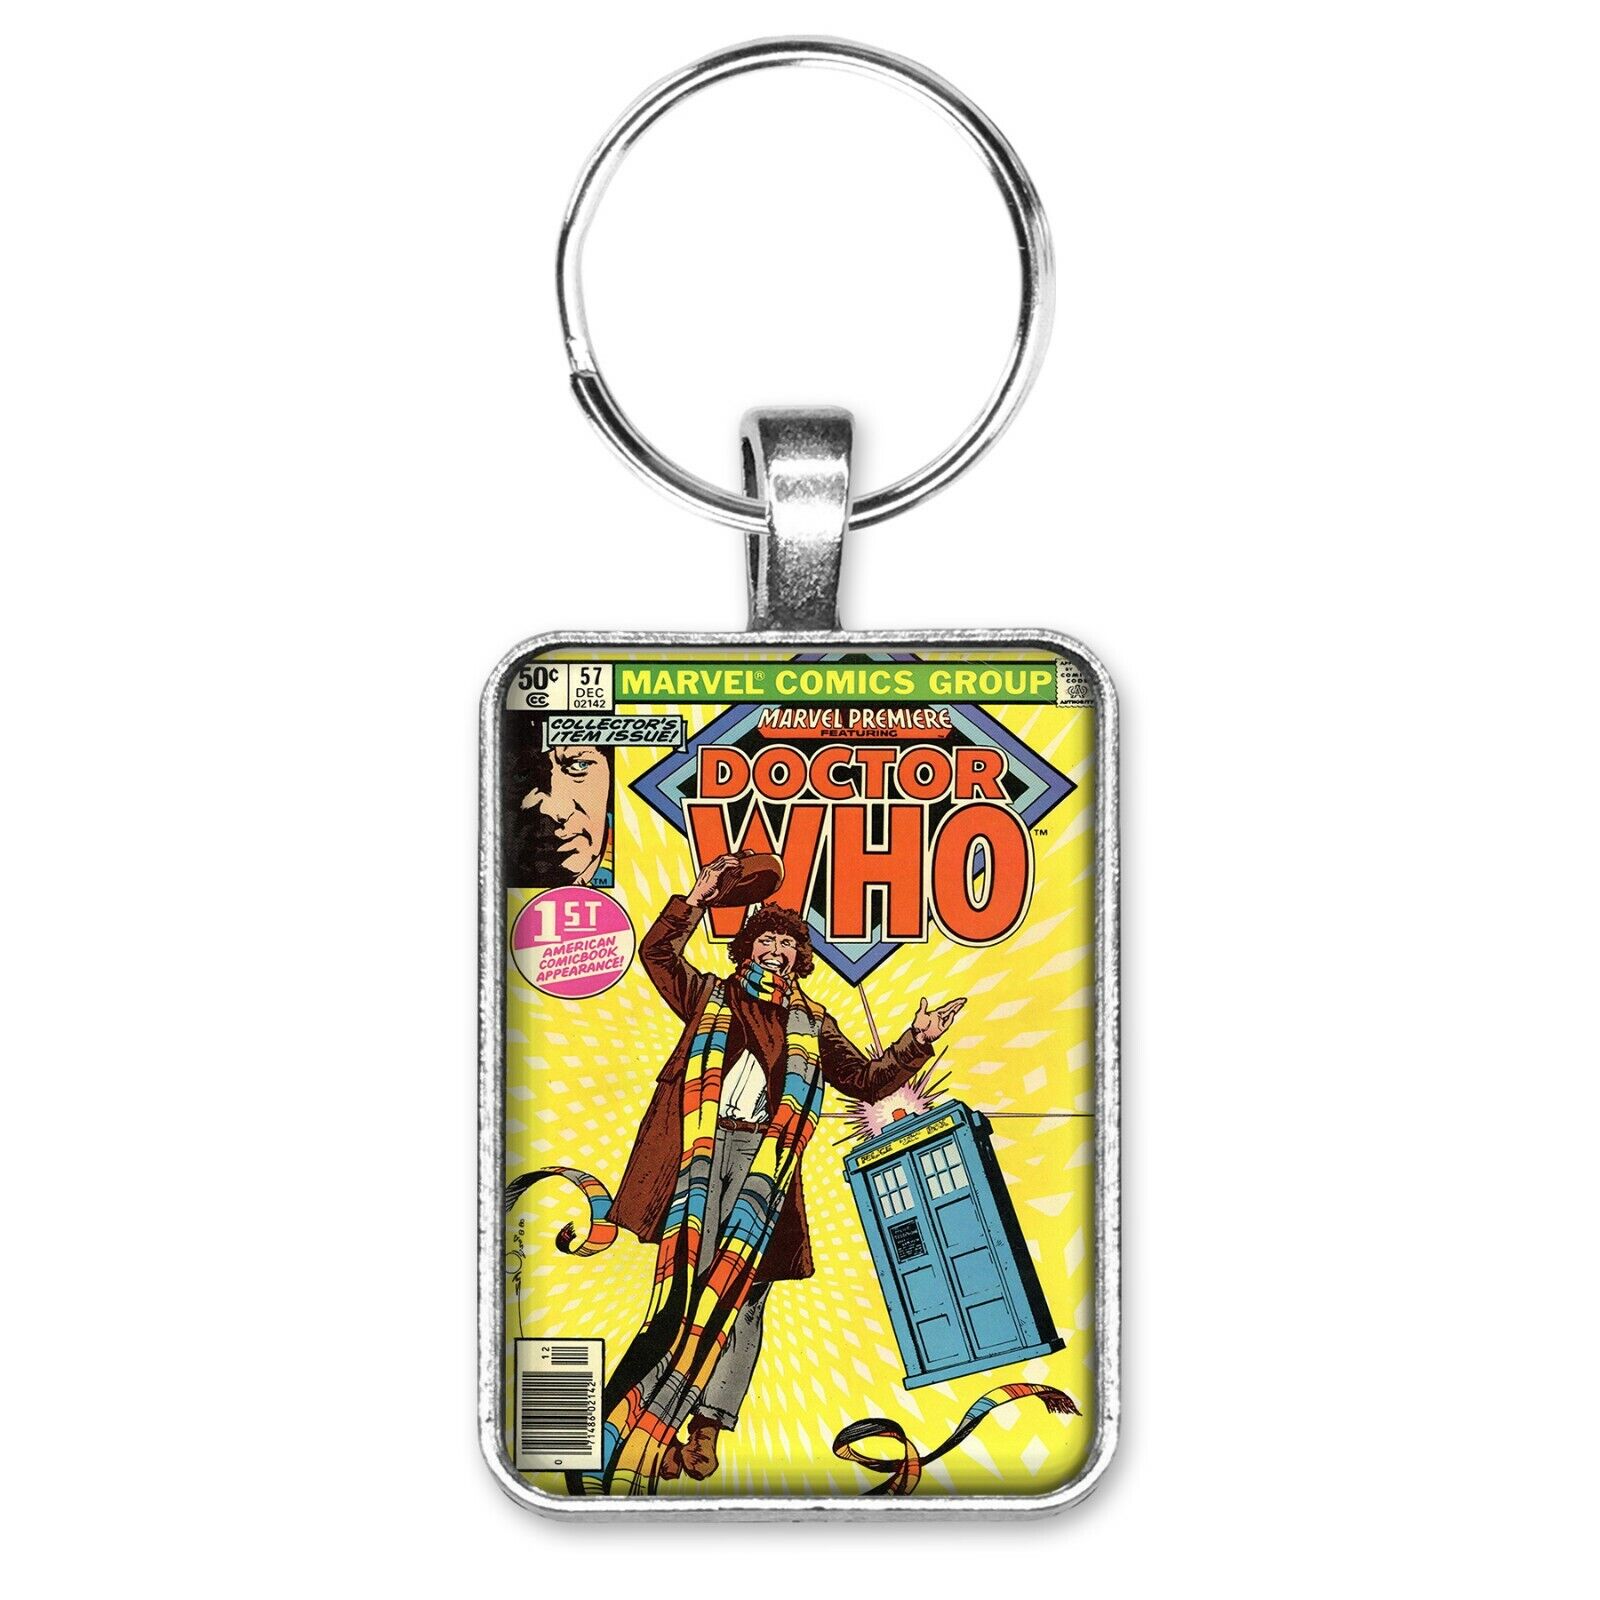 Marvel Presents Featuring Doctor Who #57 Cover Key Ring or Necklace Comic Book